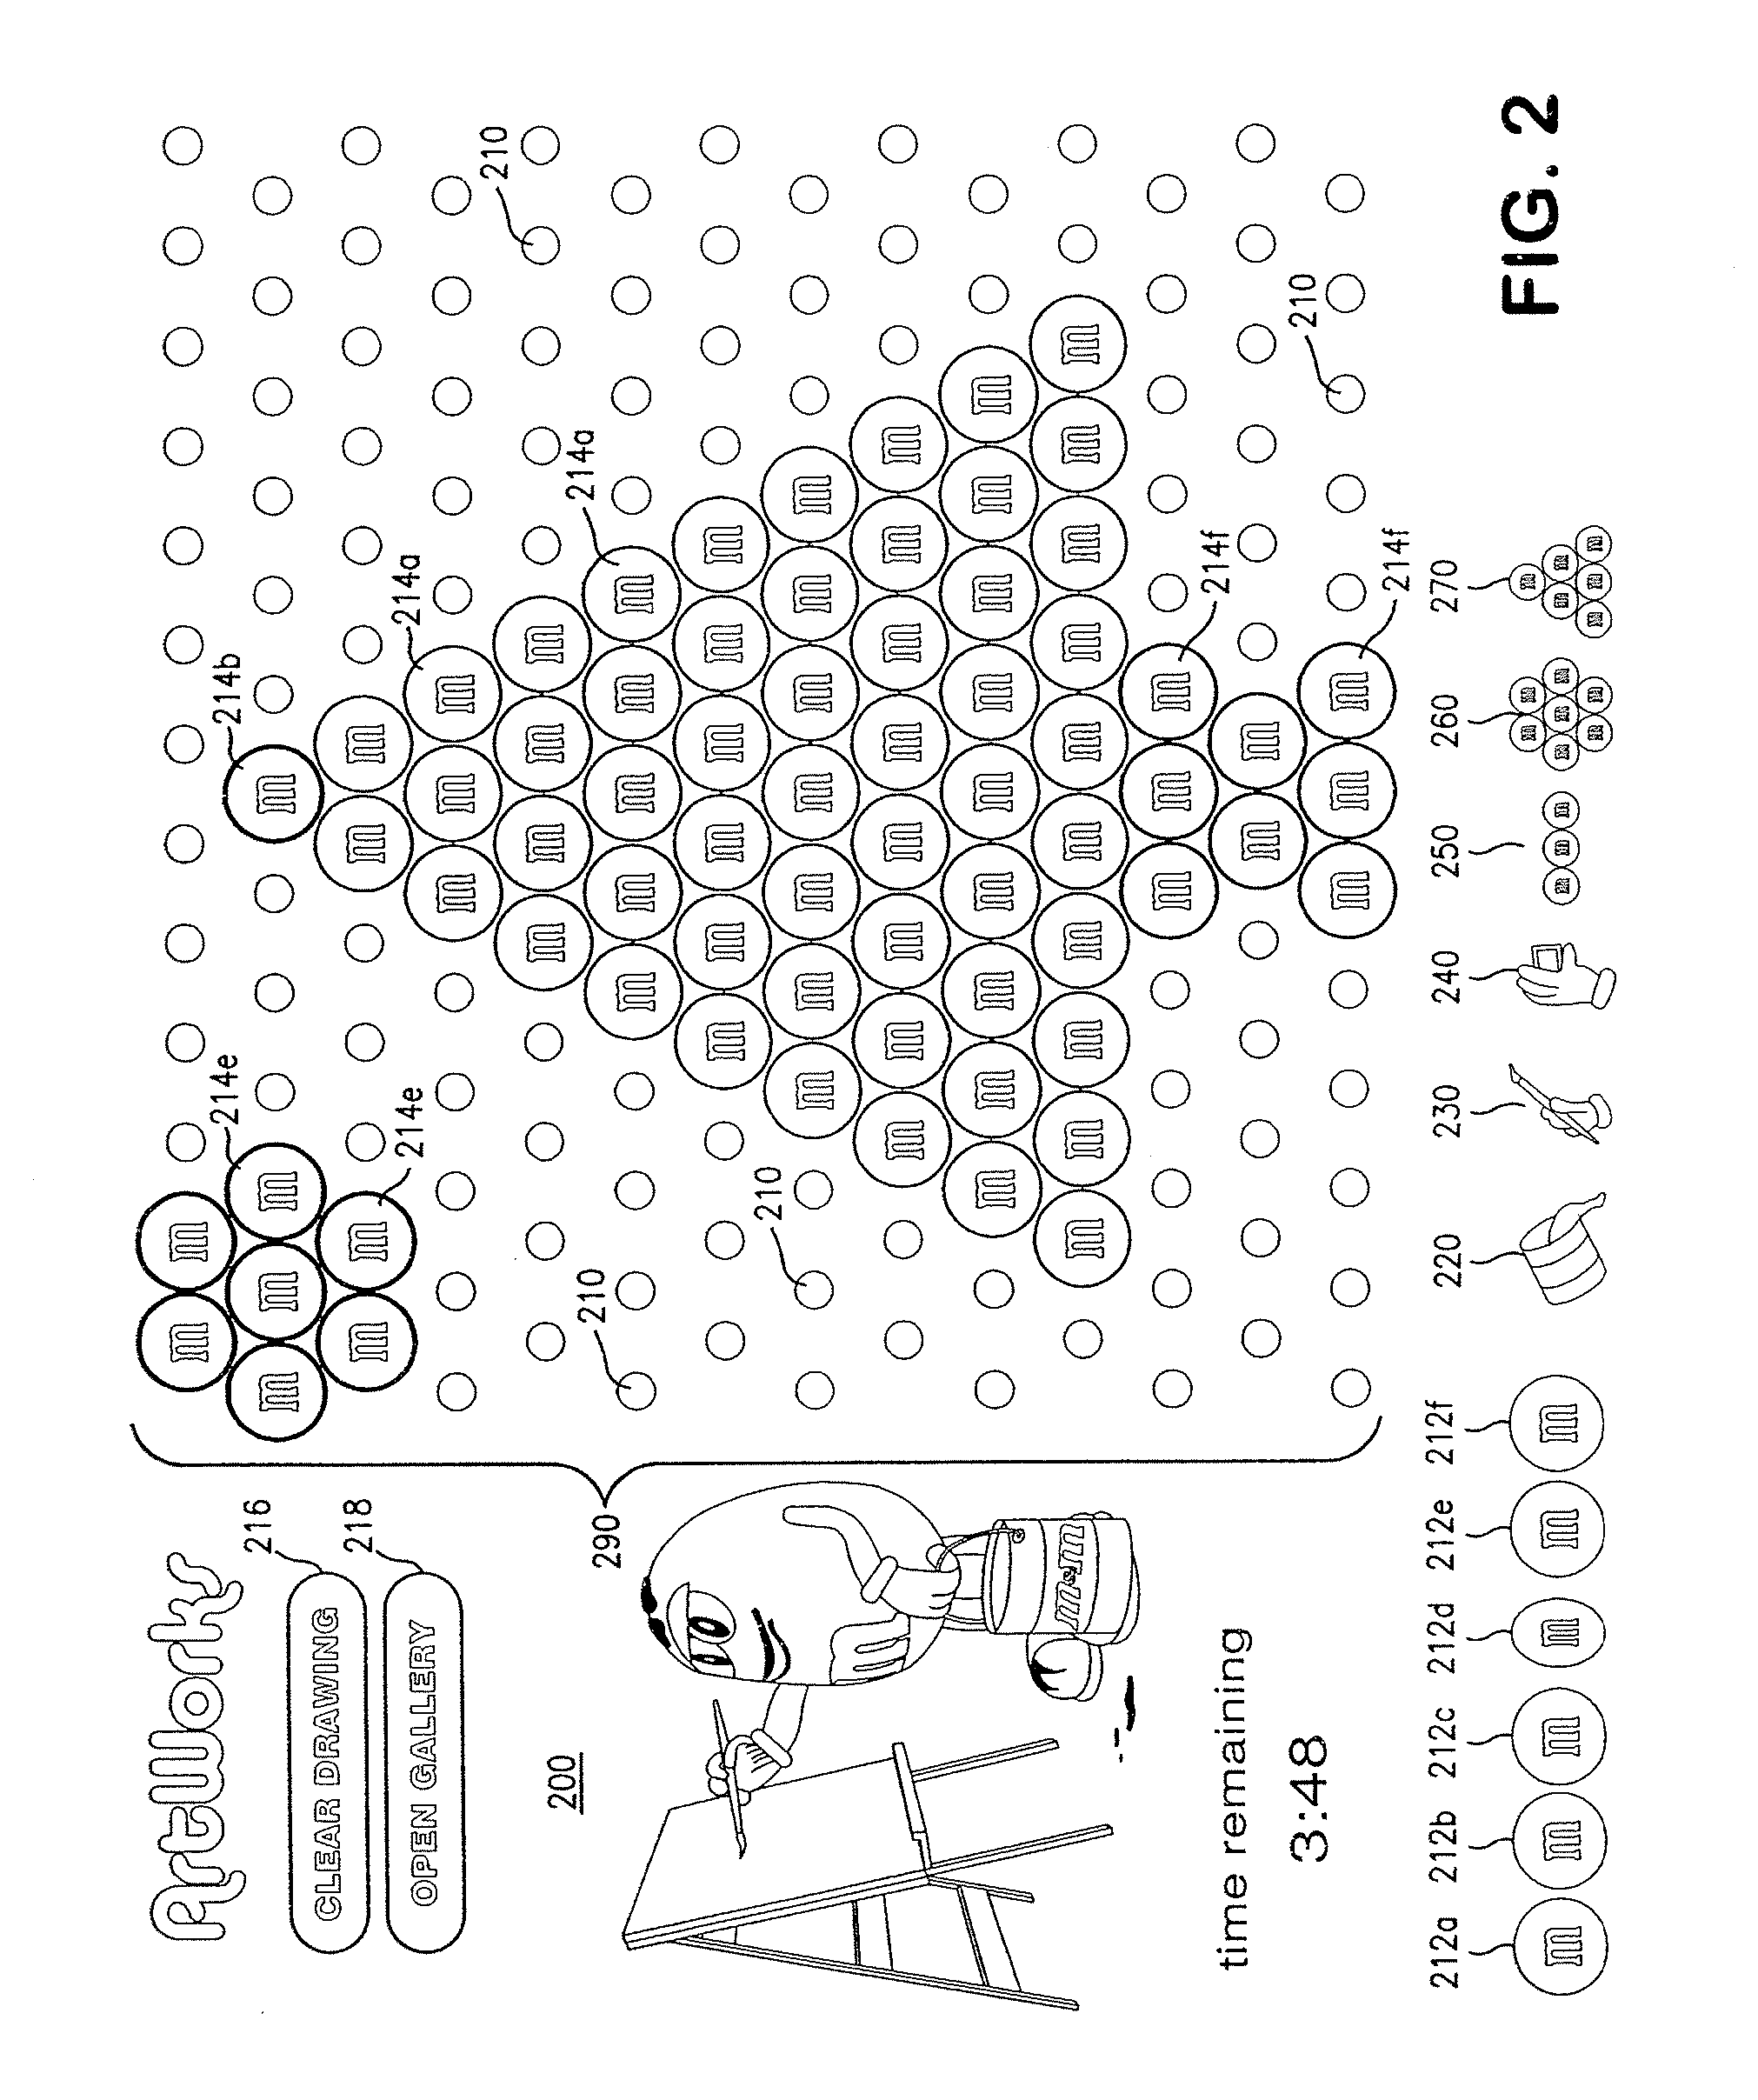 System and method for designing and producing confectionary arrangement